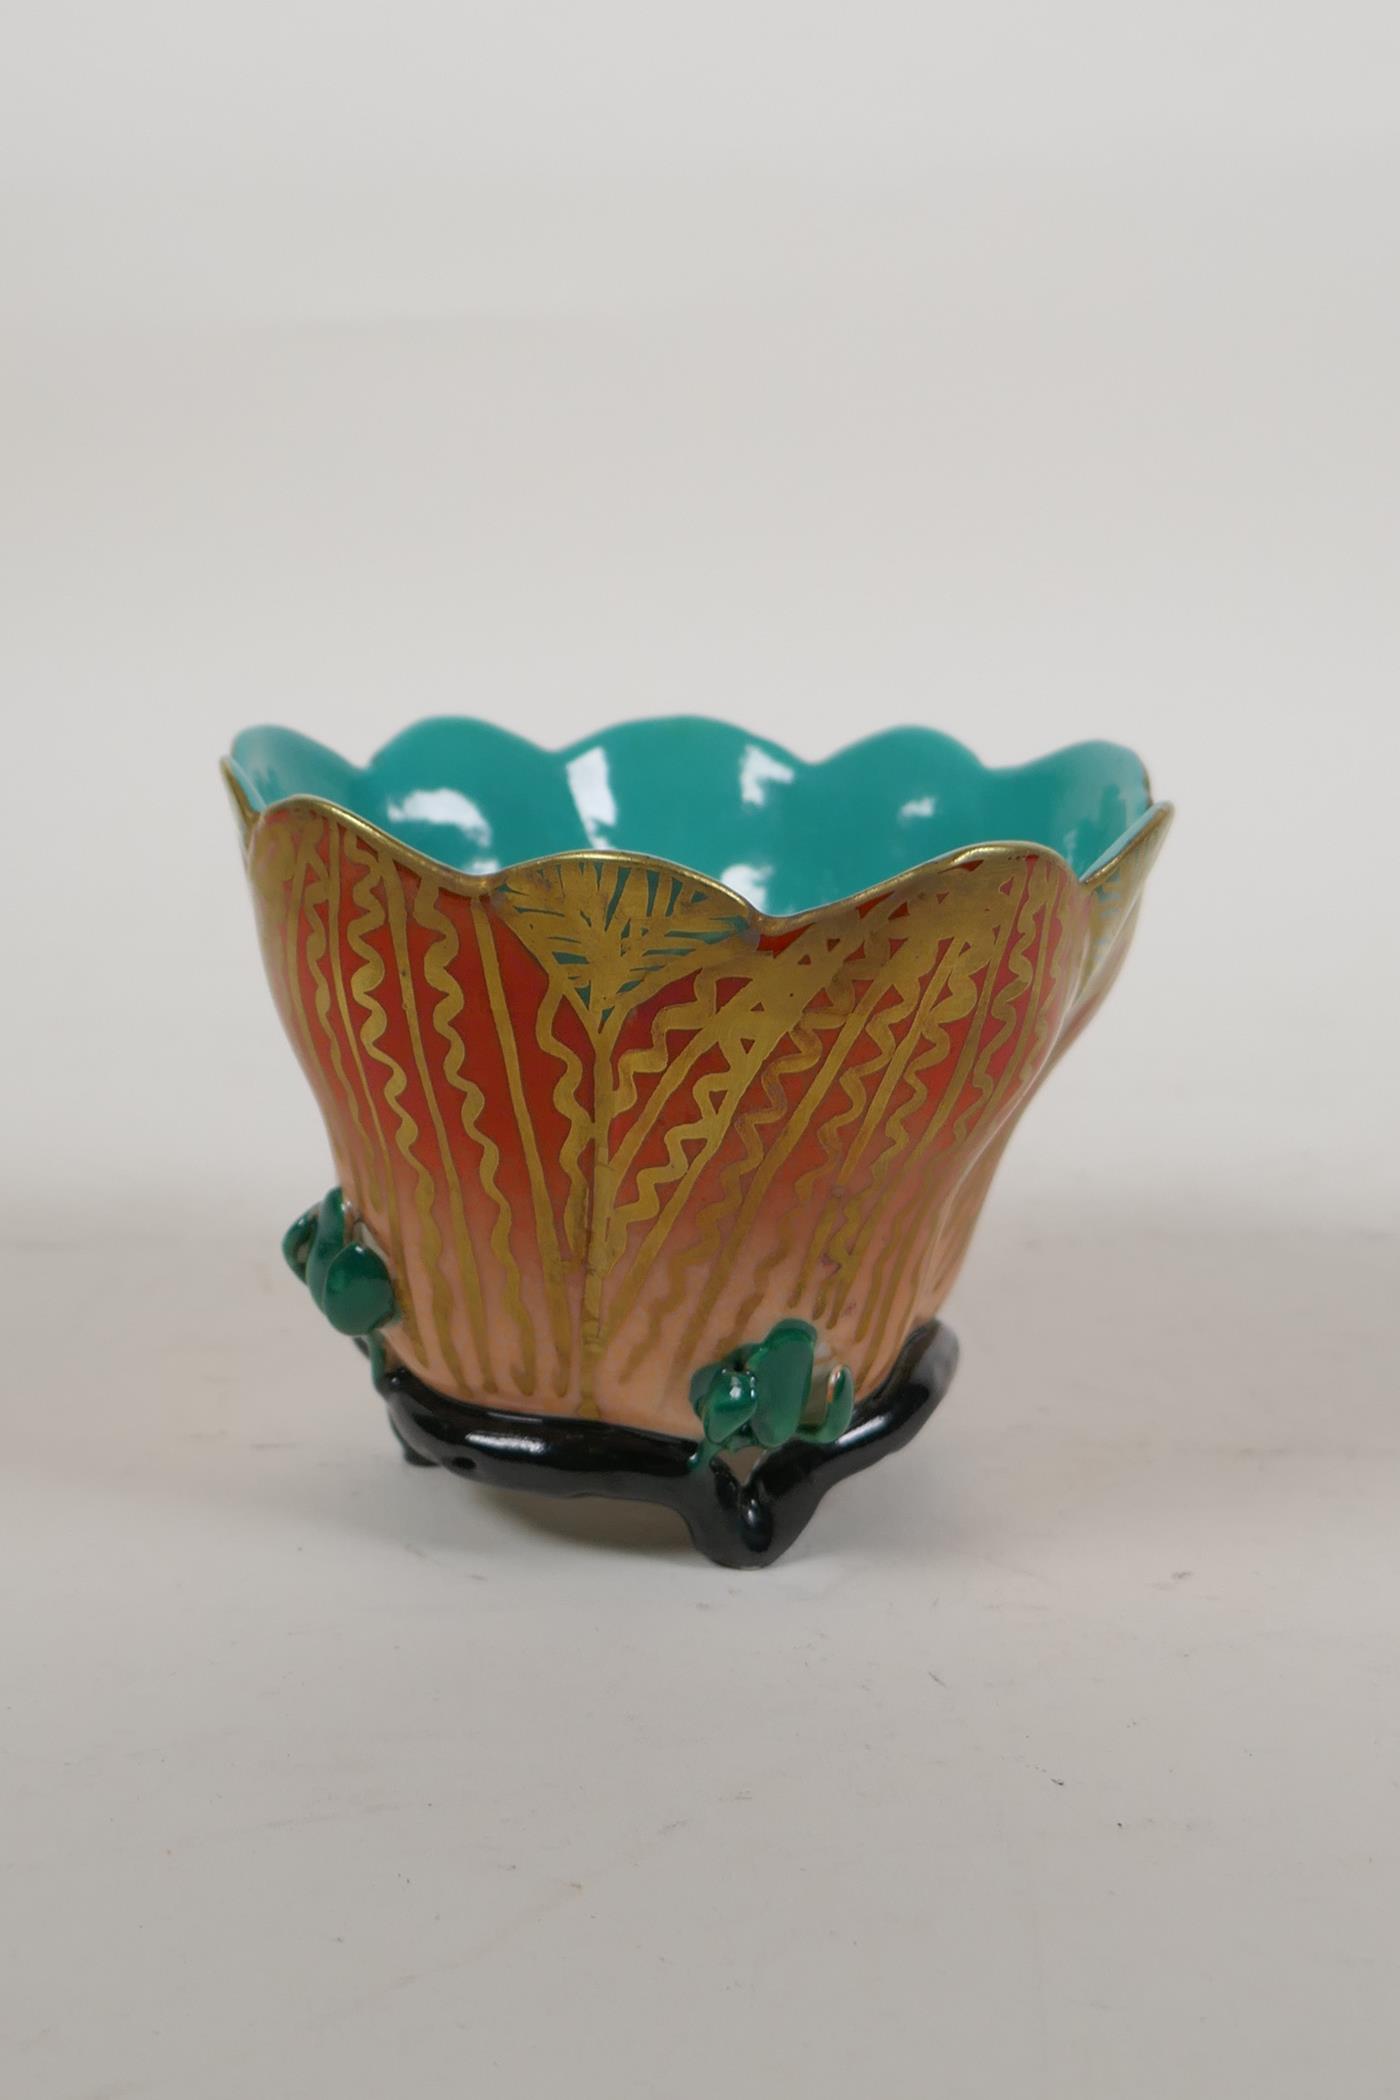 A polychrome porcelain lotus flower shaped rice bowl on a root wood style tripod base, 4 character - Image 2 of 4